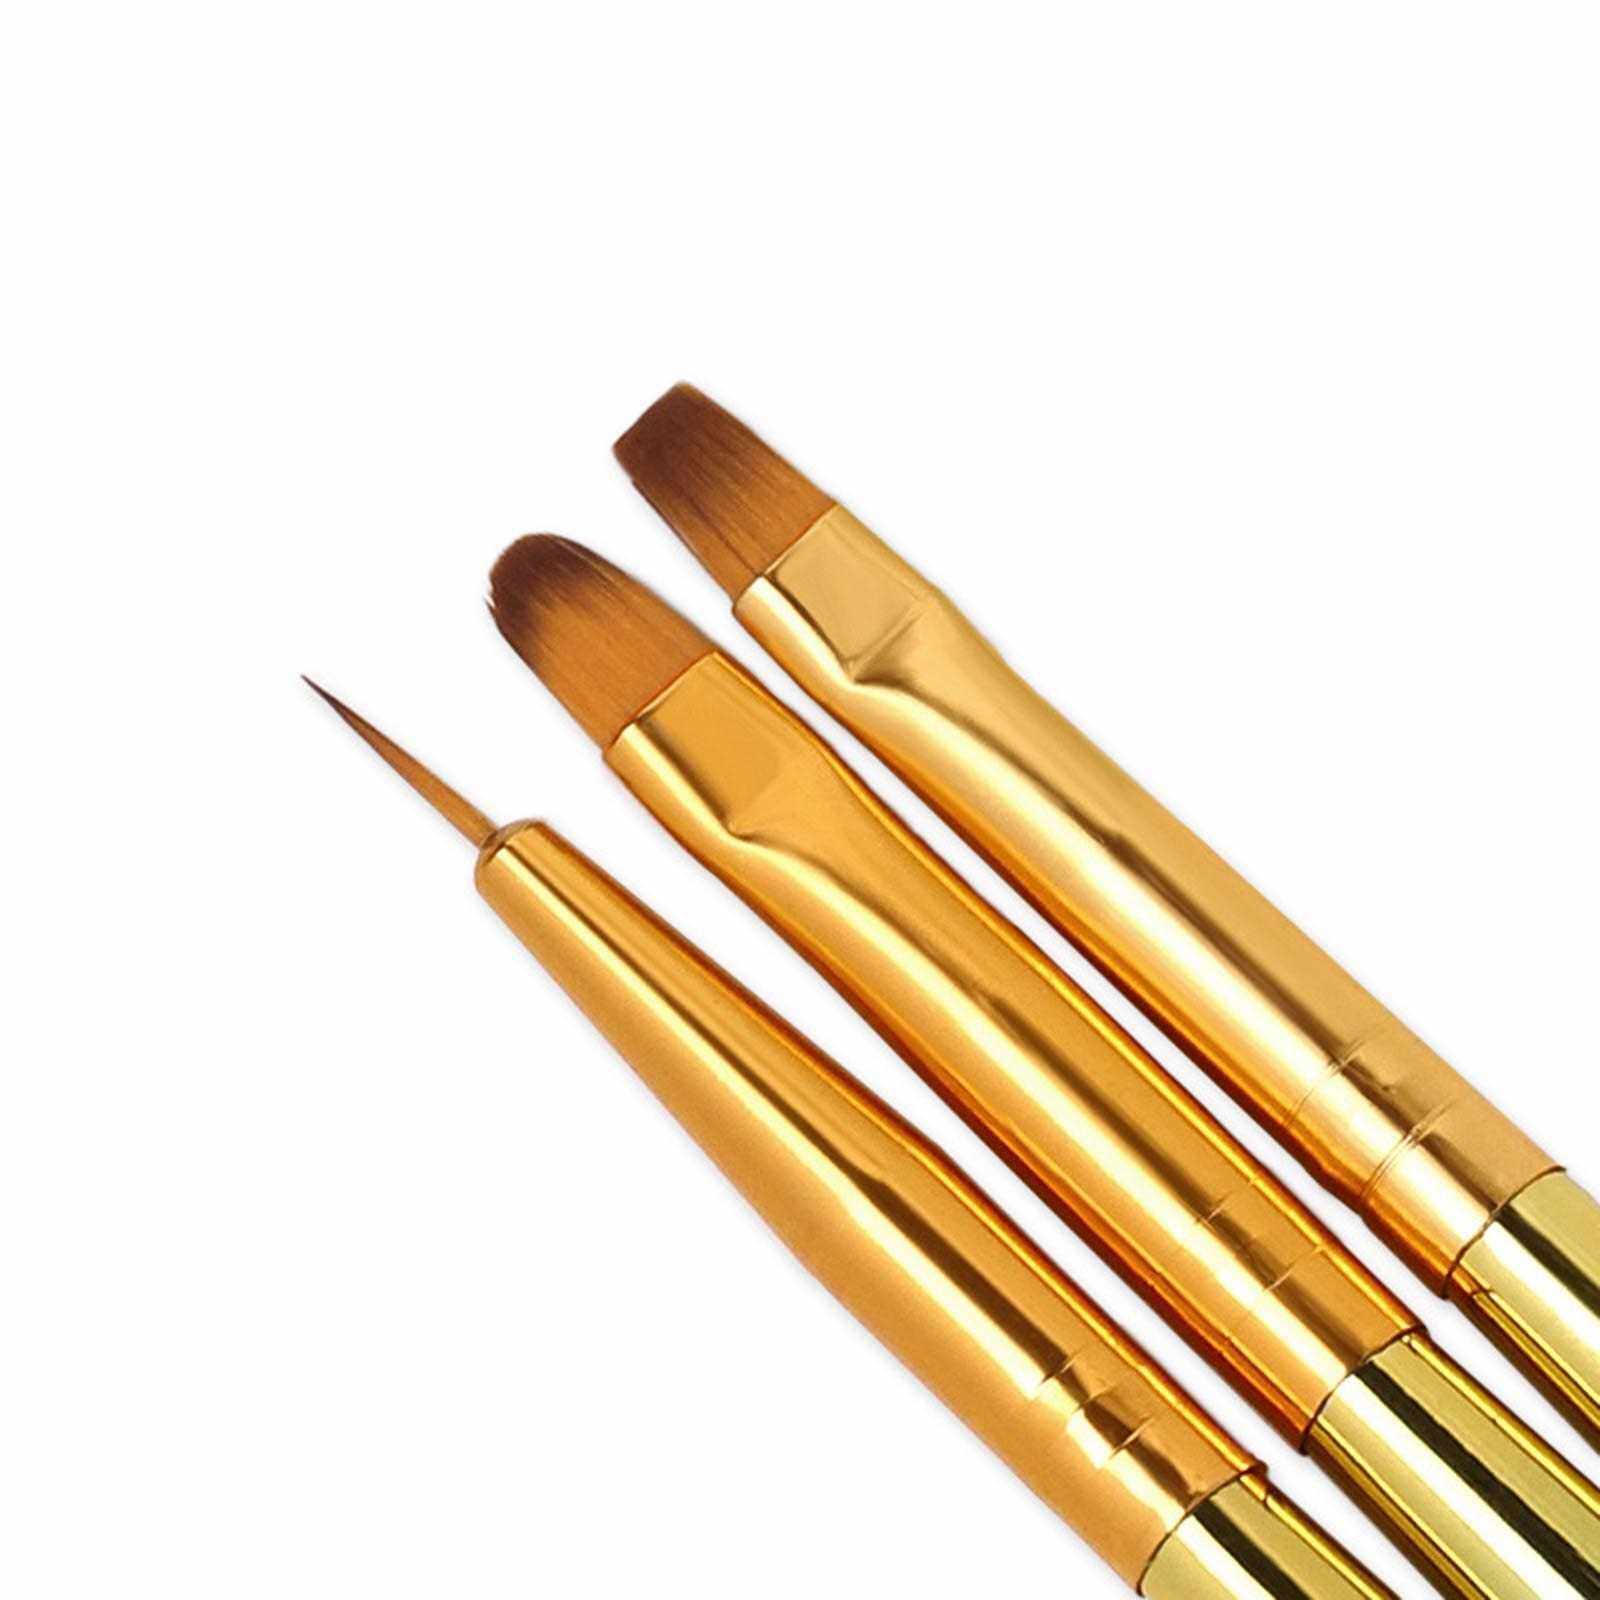 Best Selling 3Pcs/Set Nail Art Brush Painting Drawing Carving Pen Crystal Liner Dotting Acrylic Builder UV Gel Painting Drawing Brush Manicure Tool (Standard)